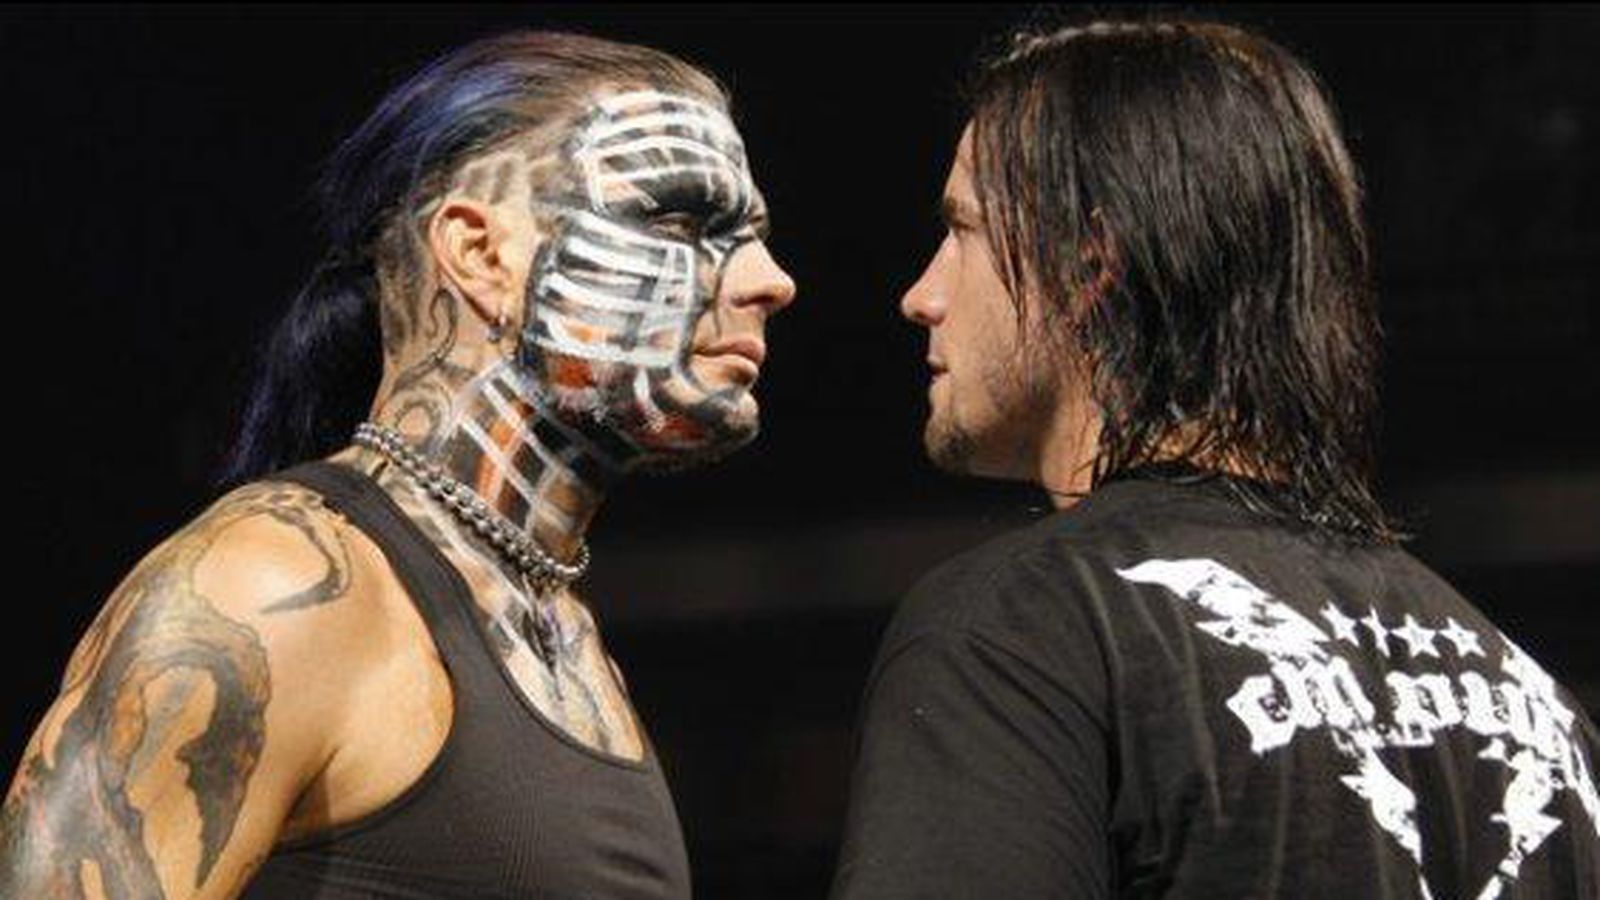 CM Punk and Jeff Hardy had a deeply personal rivalry